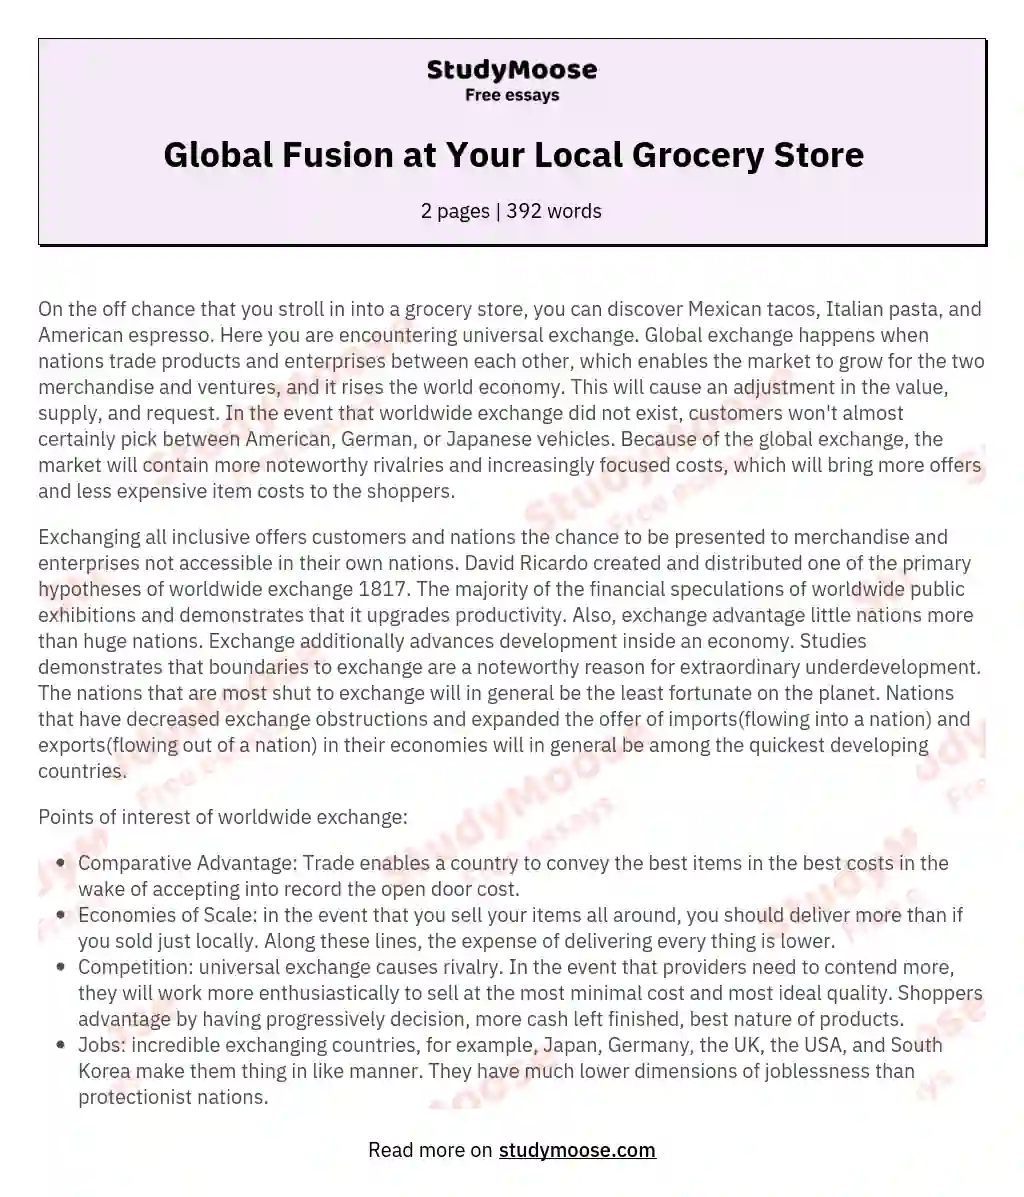 Global Fusion at Your Local Grocery Store essay